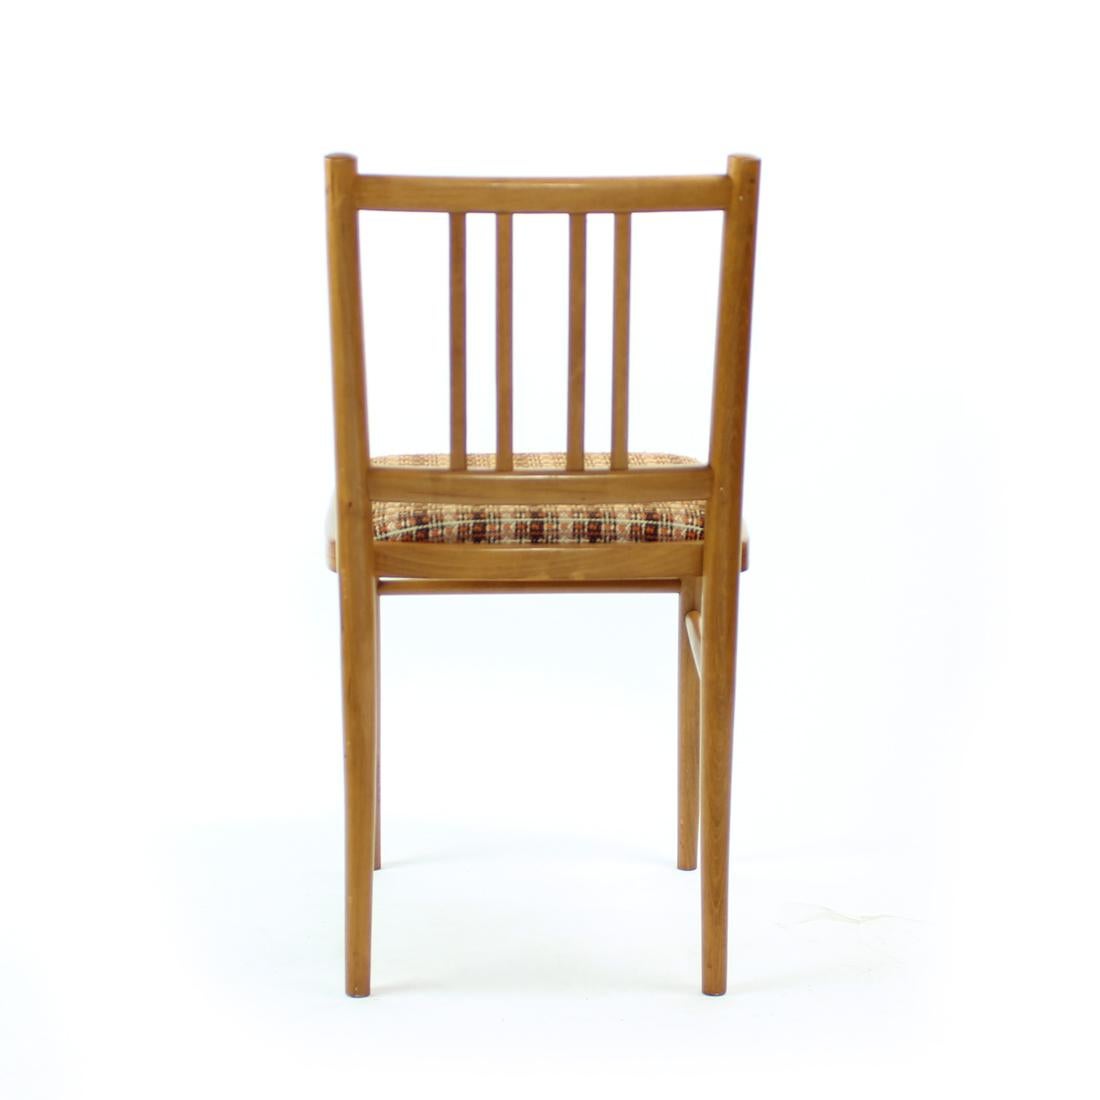 Textile Midcentury Dining Chairs In Oak And Fabric, Ton Czechoslovakia, Set Of 4 For Sale